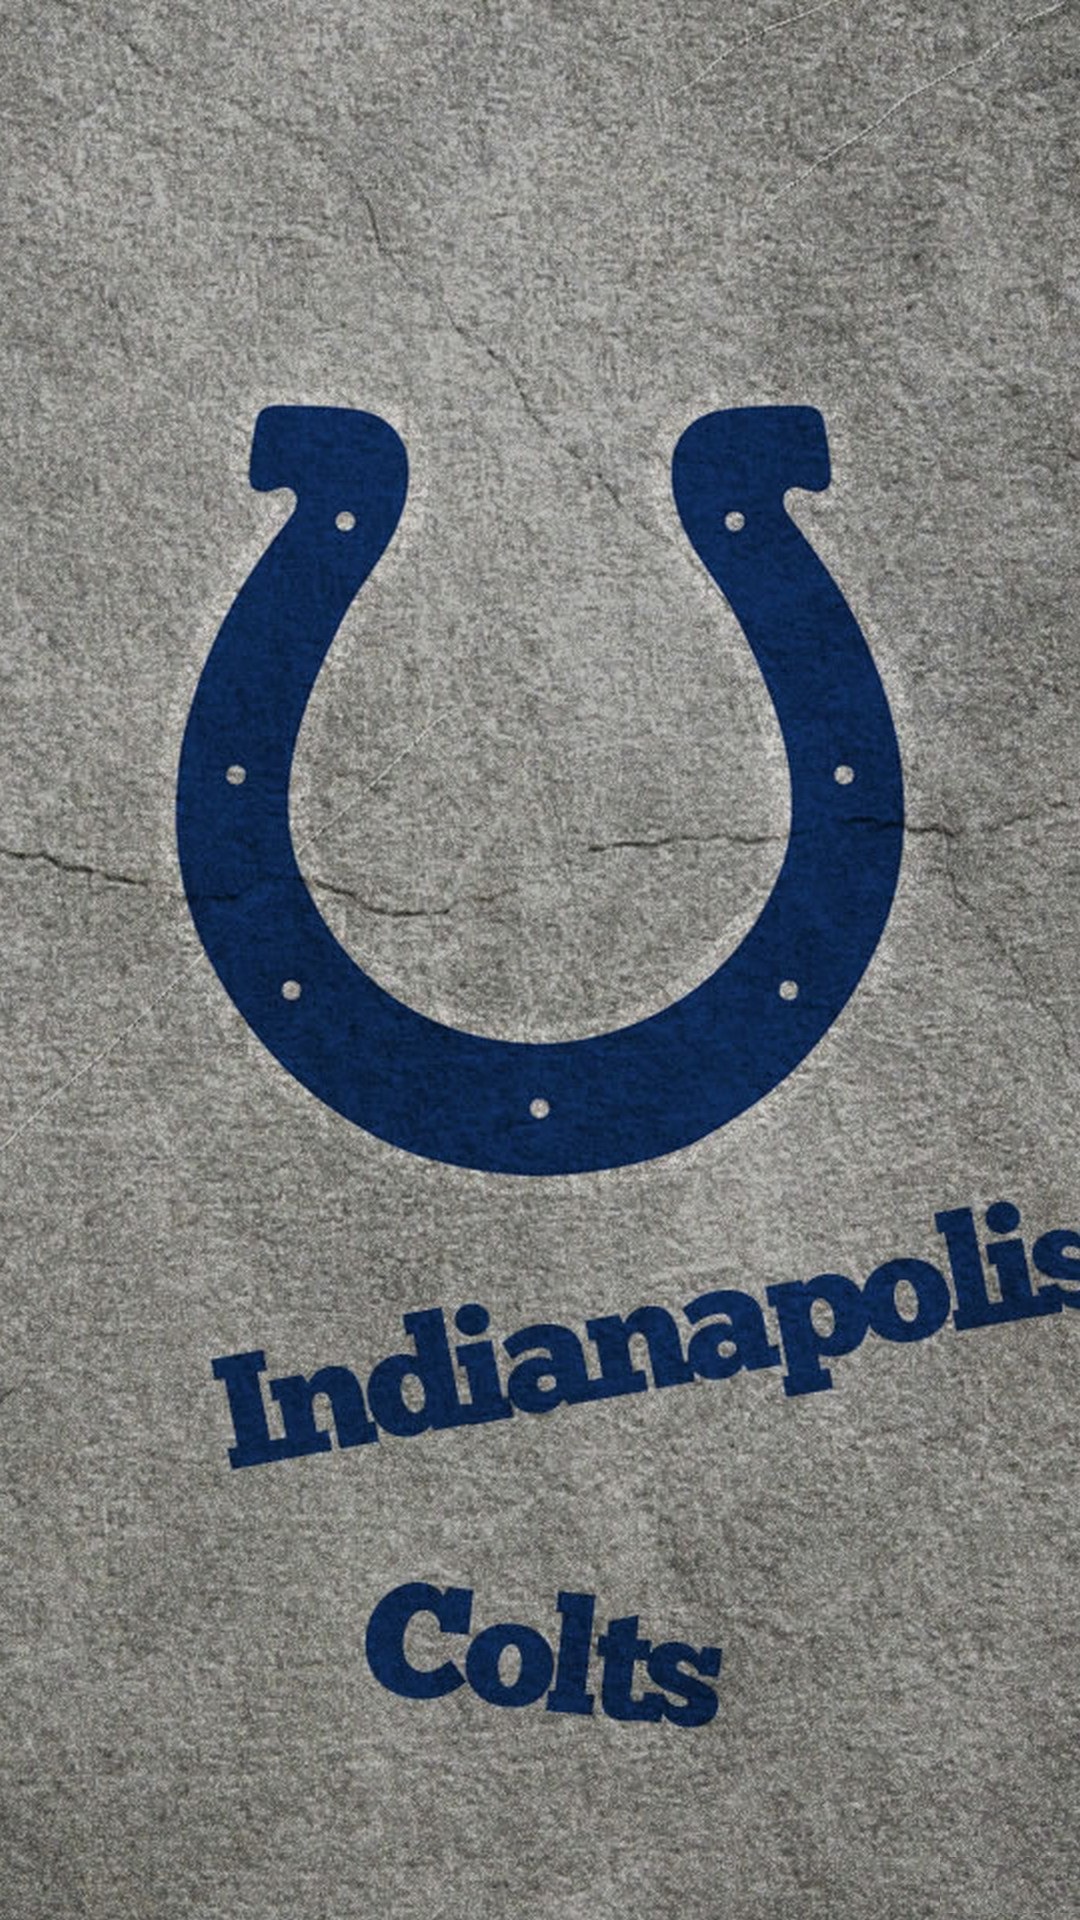 Indianapolis Colts iPhone Lock Screen Wallpaper With high-resolution 1080X1920 pixel. Donwload and set as wallpaper for your iPhone X, iPhone XS home screen backgrounds, XS Max, XR, iPhone8 lock screen wallpaper, iPhone 7, 6, SE, and other mobile devices